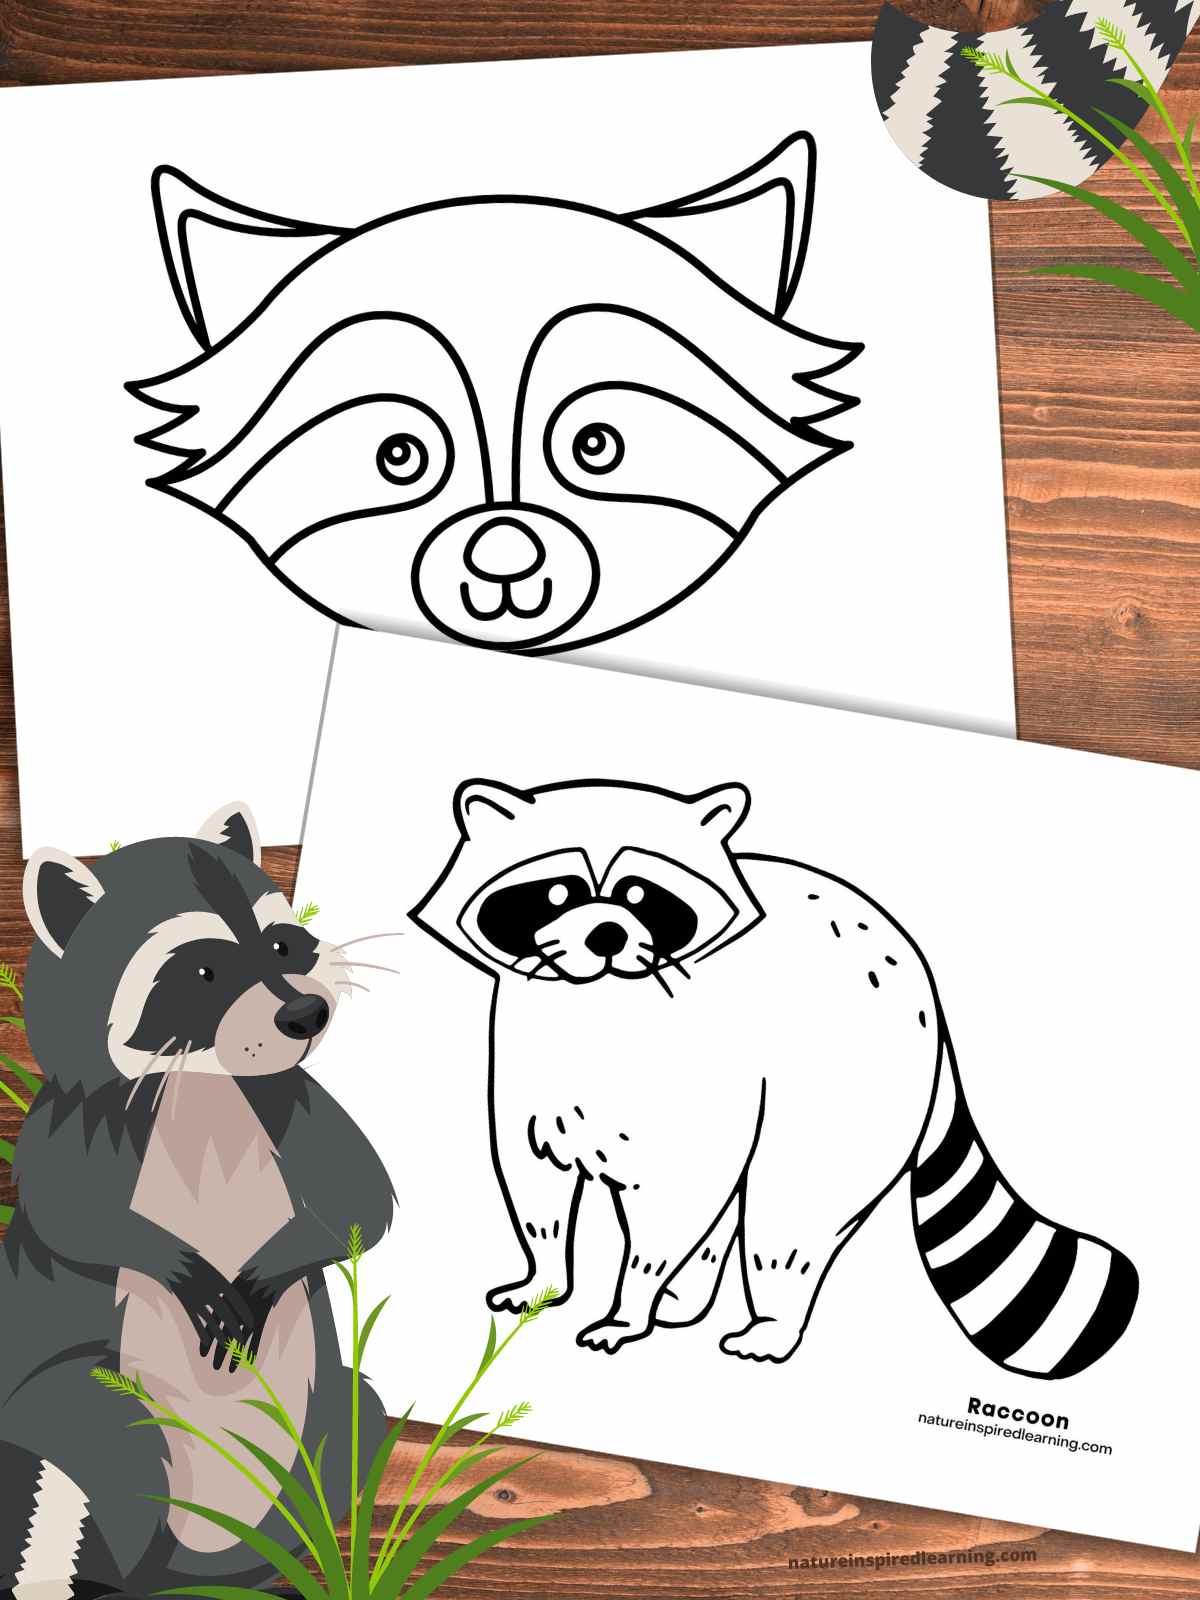 two black and white raccoon coloring pages overlapping on a wooden background with a stripped tail in the grass upper right and upright raccoon in the grass bottom left